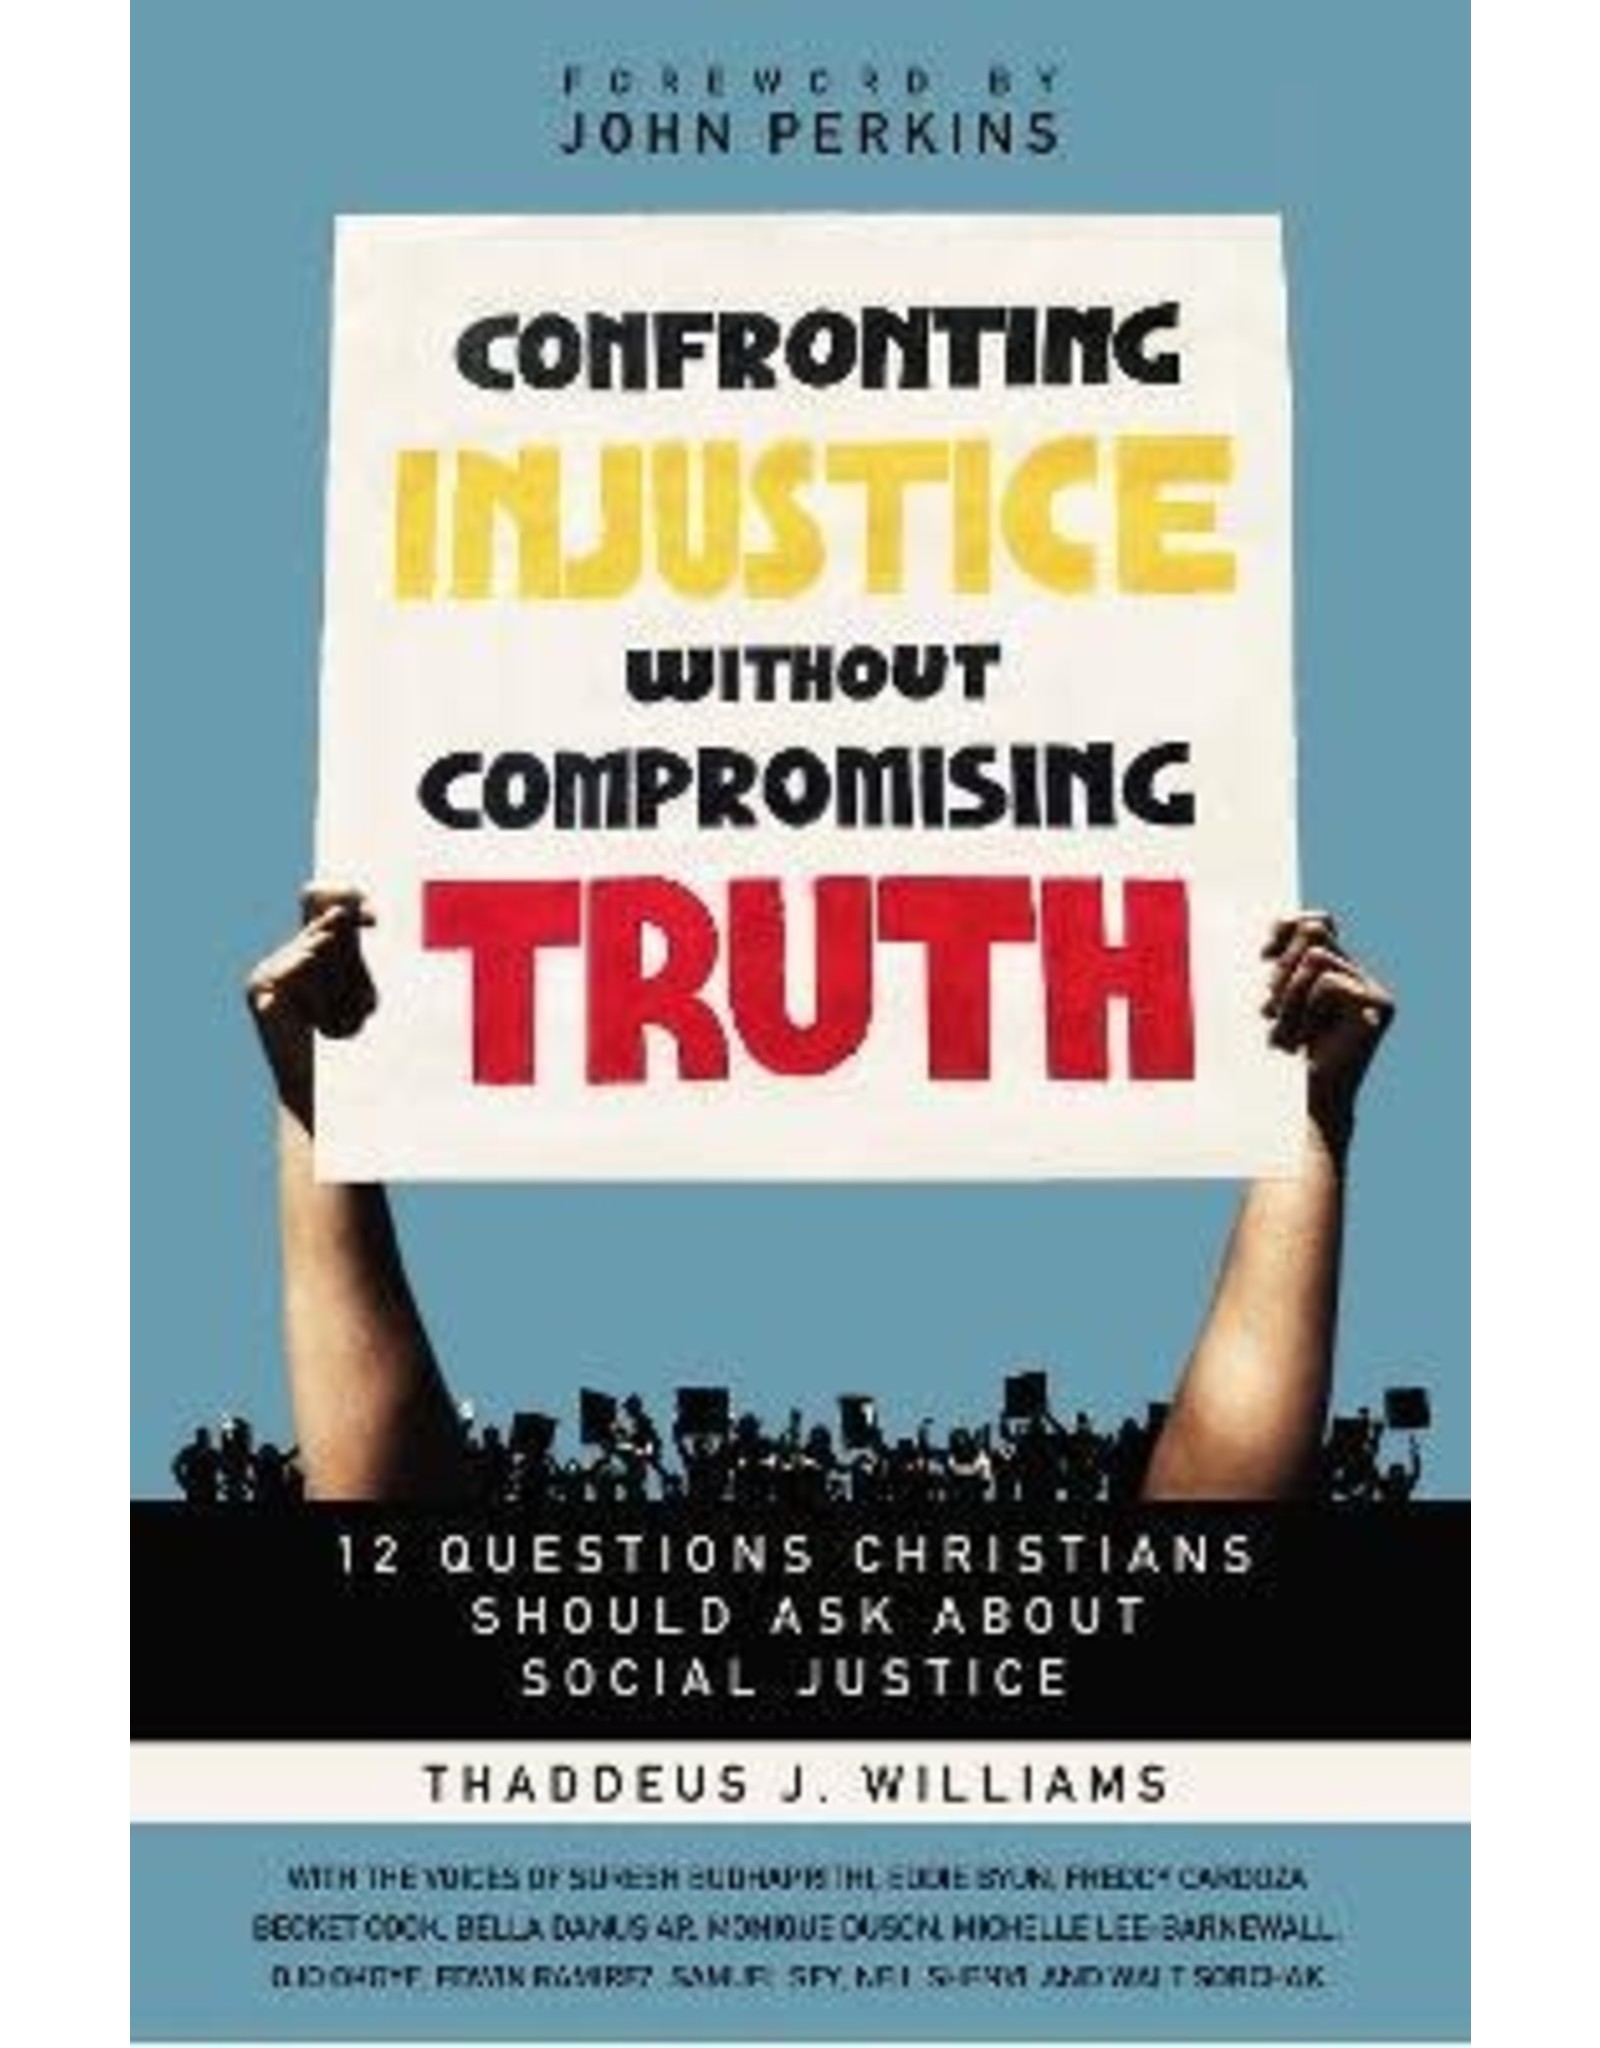 Thaddeus J. William Confronting Injustice Without Compromising Truth